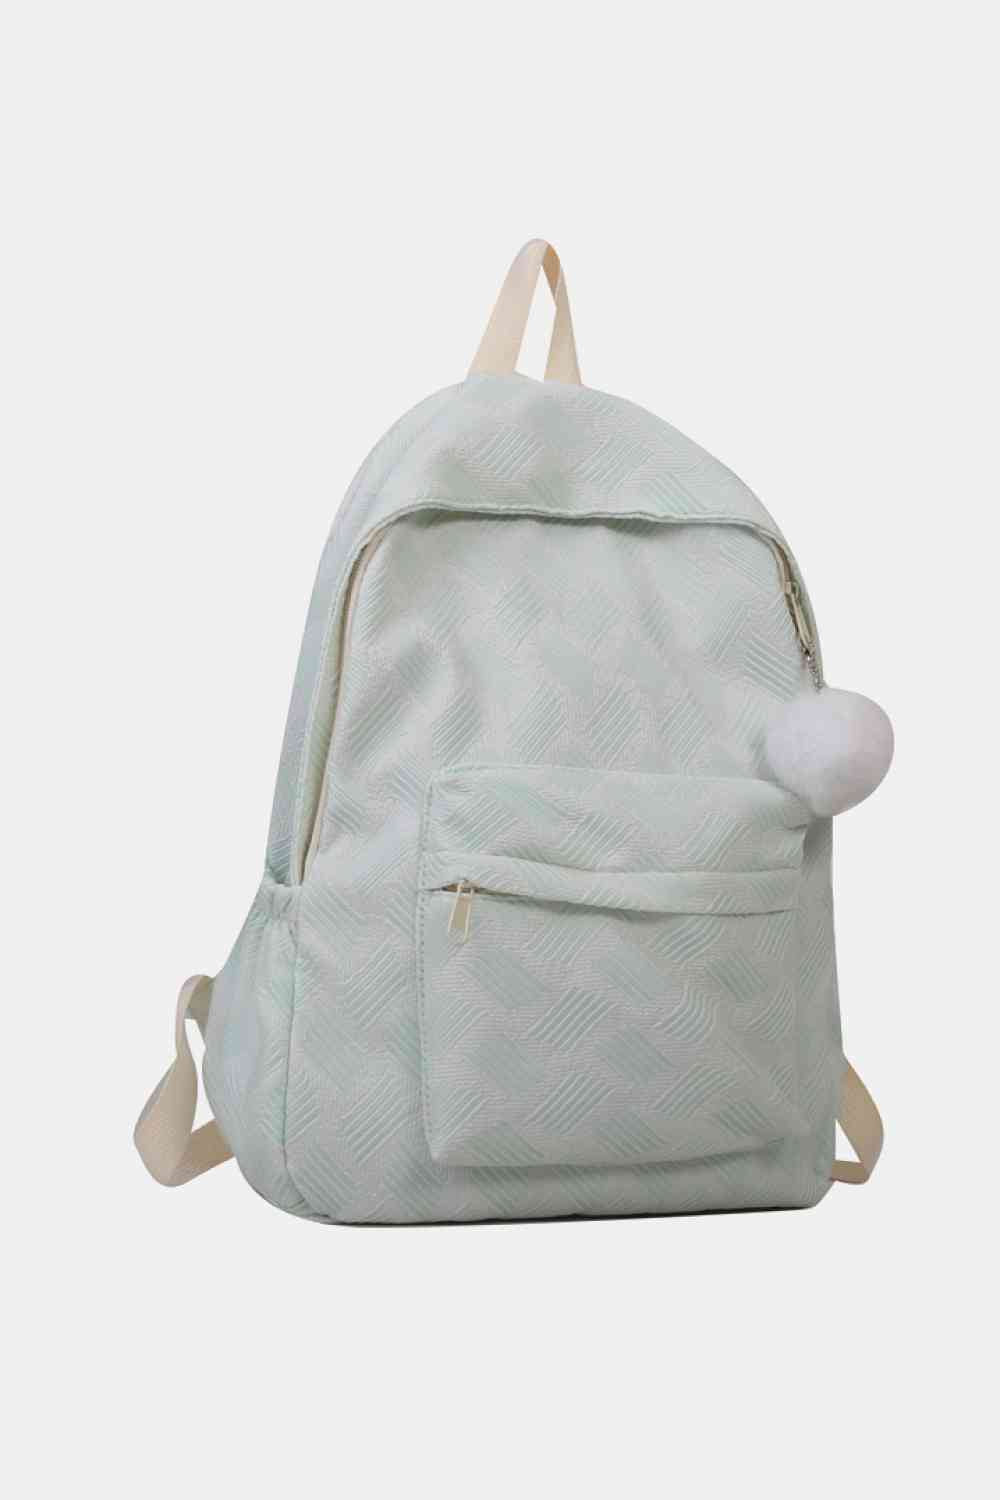 Printed Polyester Large Backpack (Fluffy Ball Included)  Hot Trends